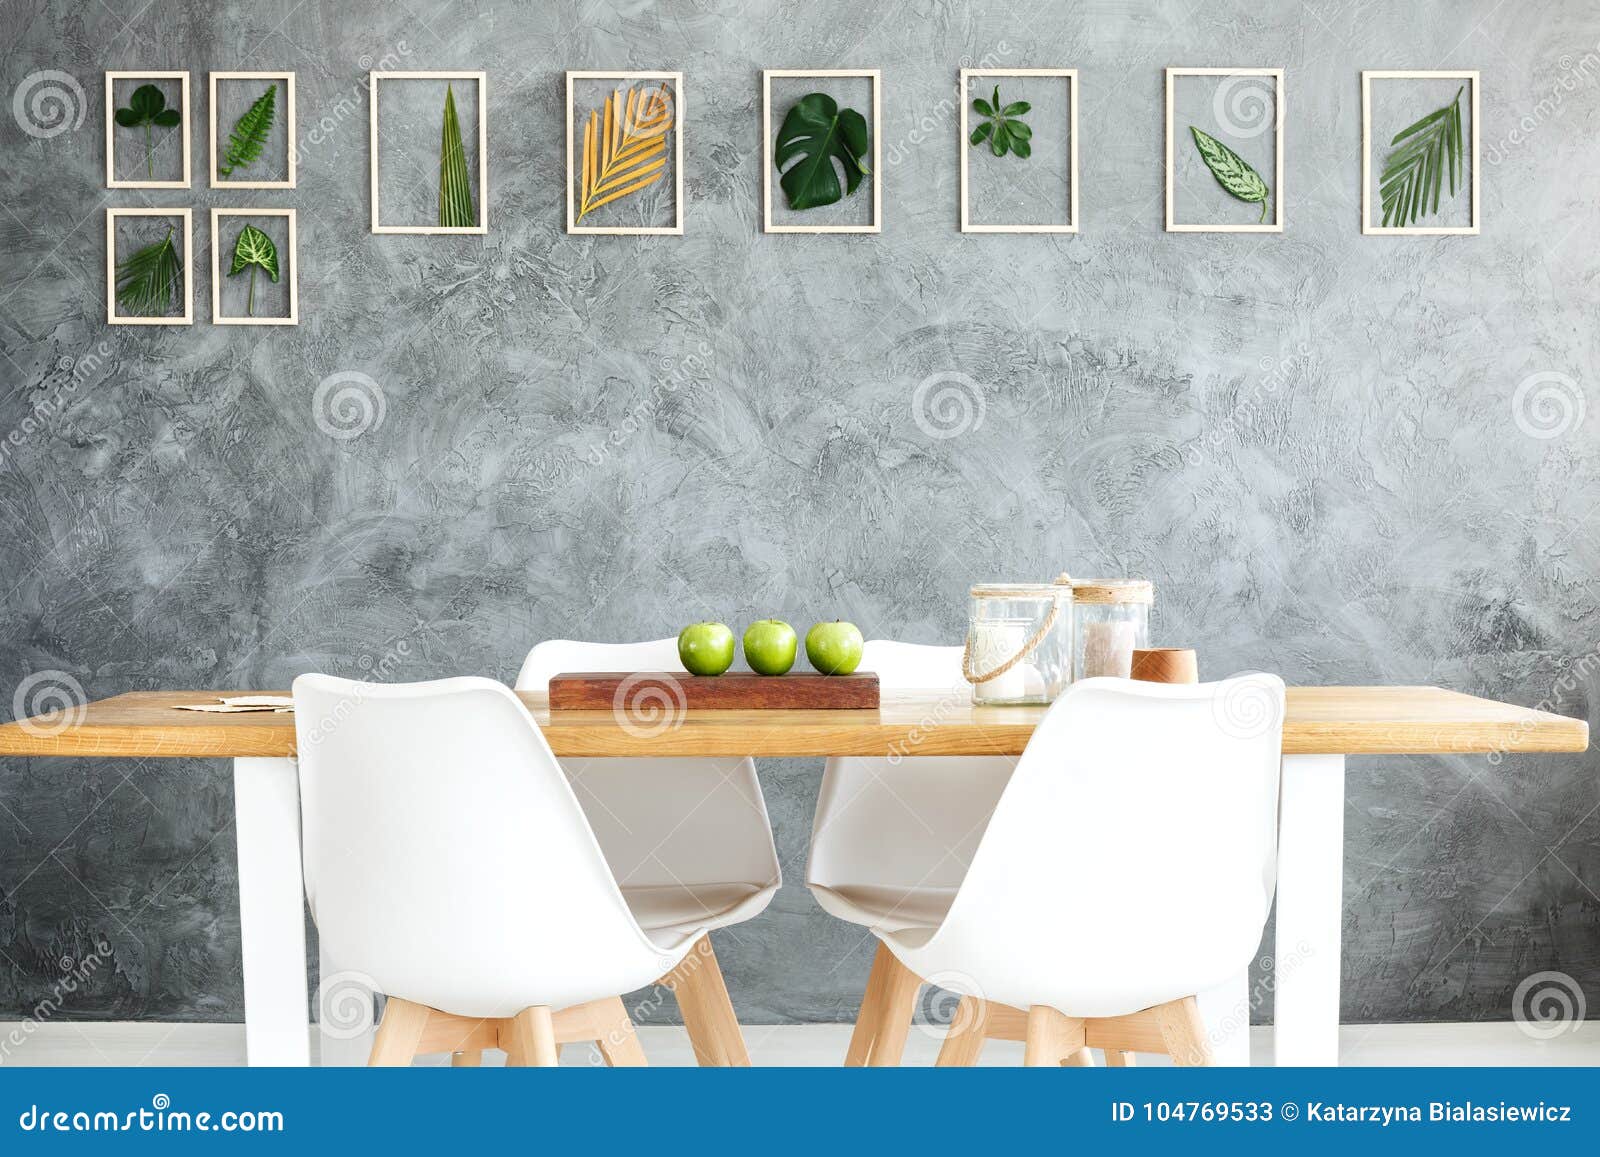 Dining Room With Botanical Gallery Stock Image Image Of Interior